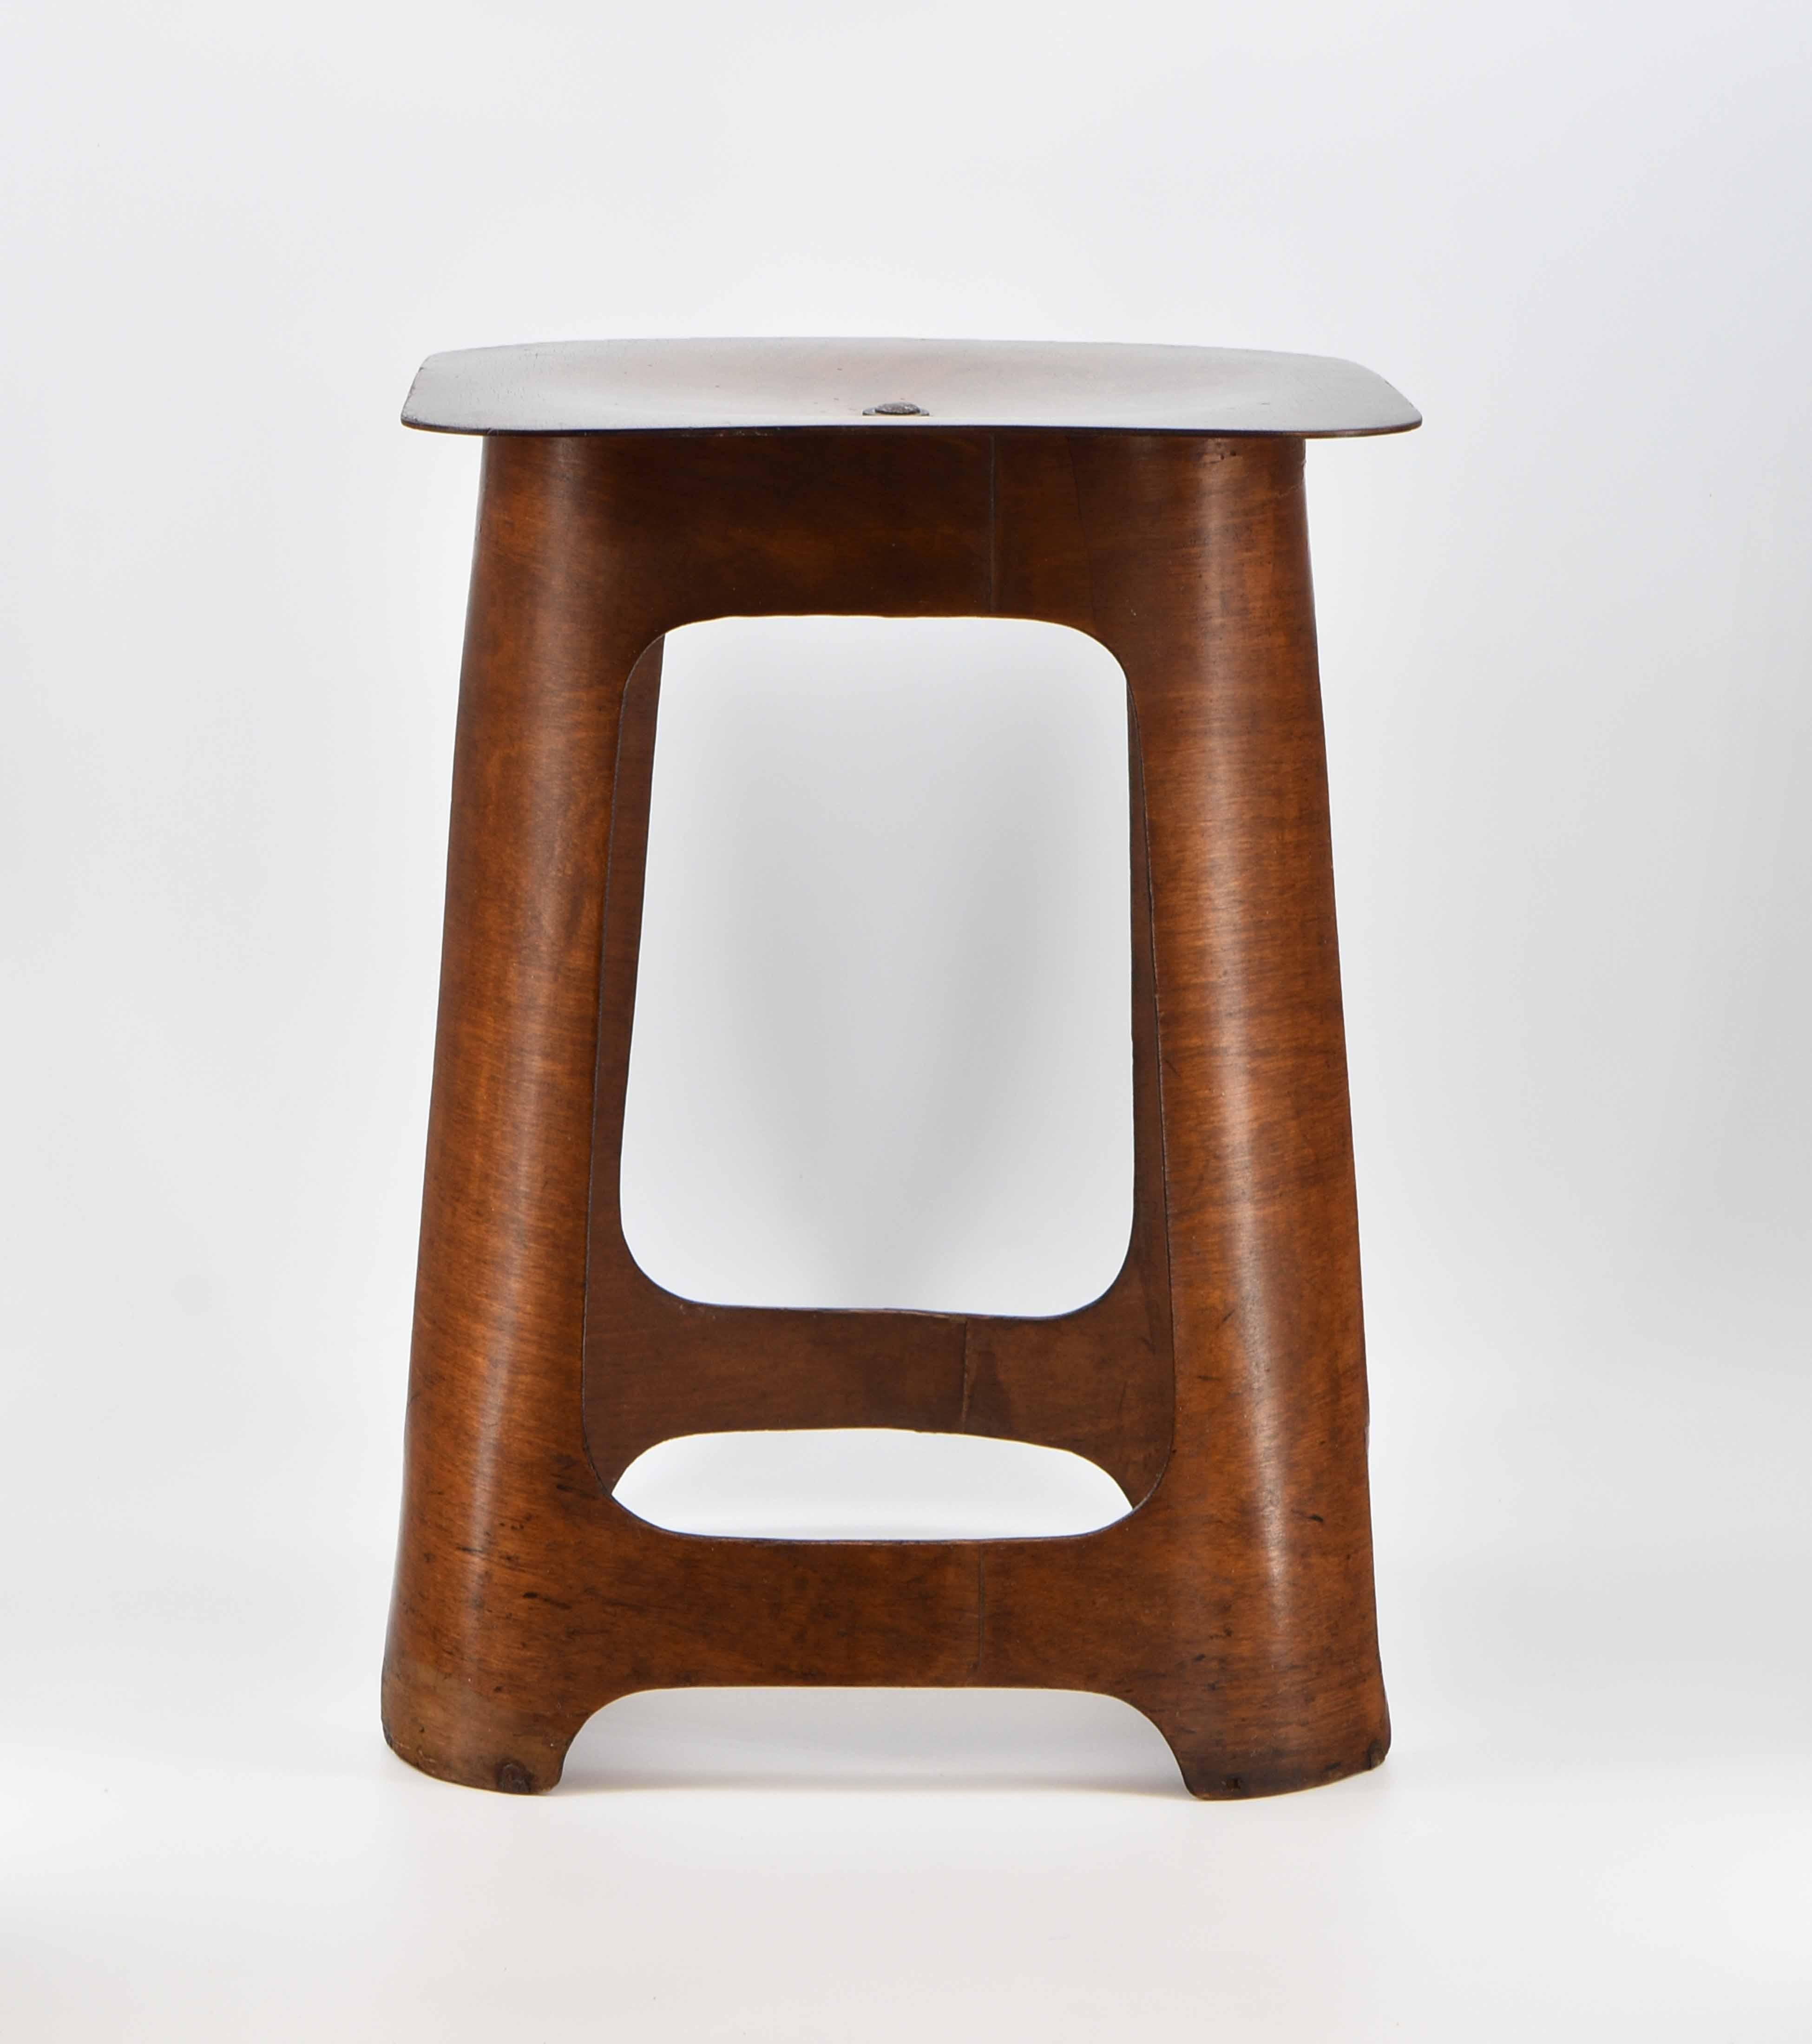 An iconic Isokon laminated birch plywood stool, with distributor label: Venesta. Circa 1933.

The Isokon company was founded in London in 1929 by the entrepreneur Jack Pritchard (1899-1992), the architect Wells Coates (1895-1958) and others. The